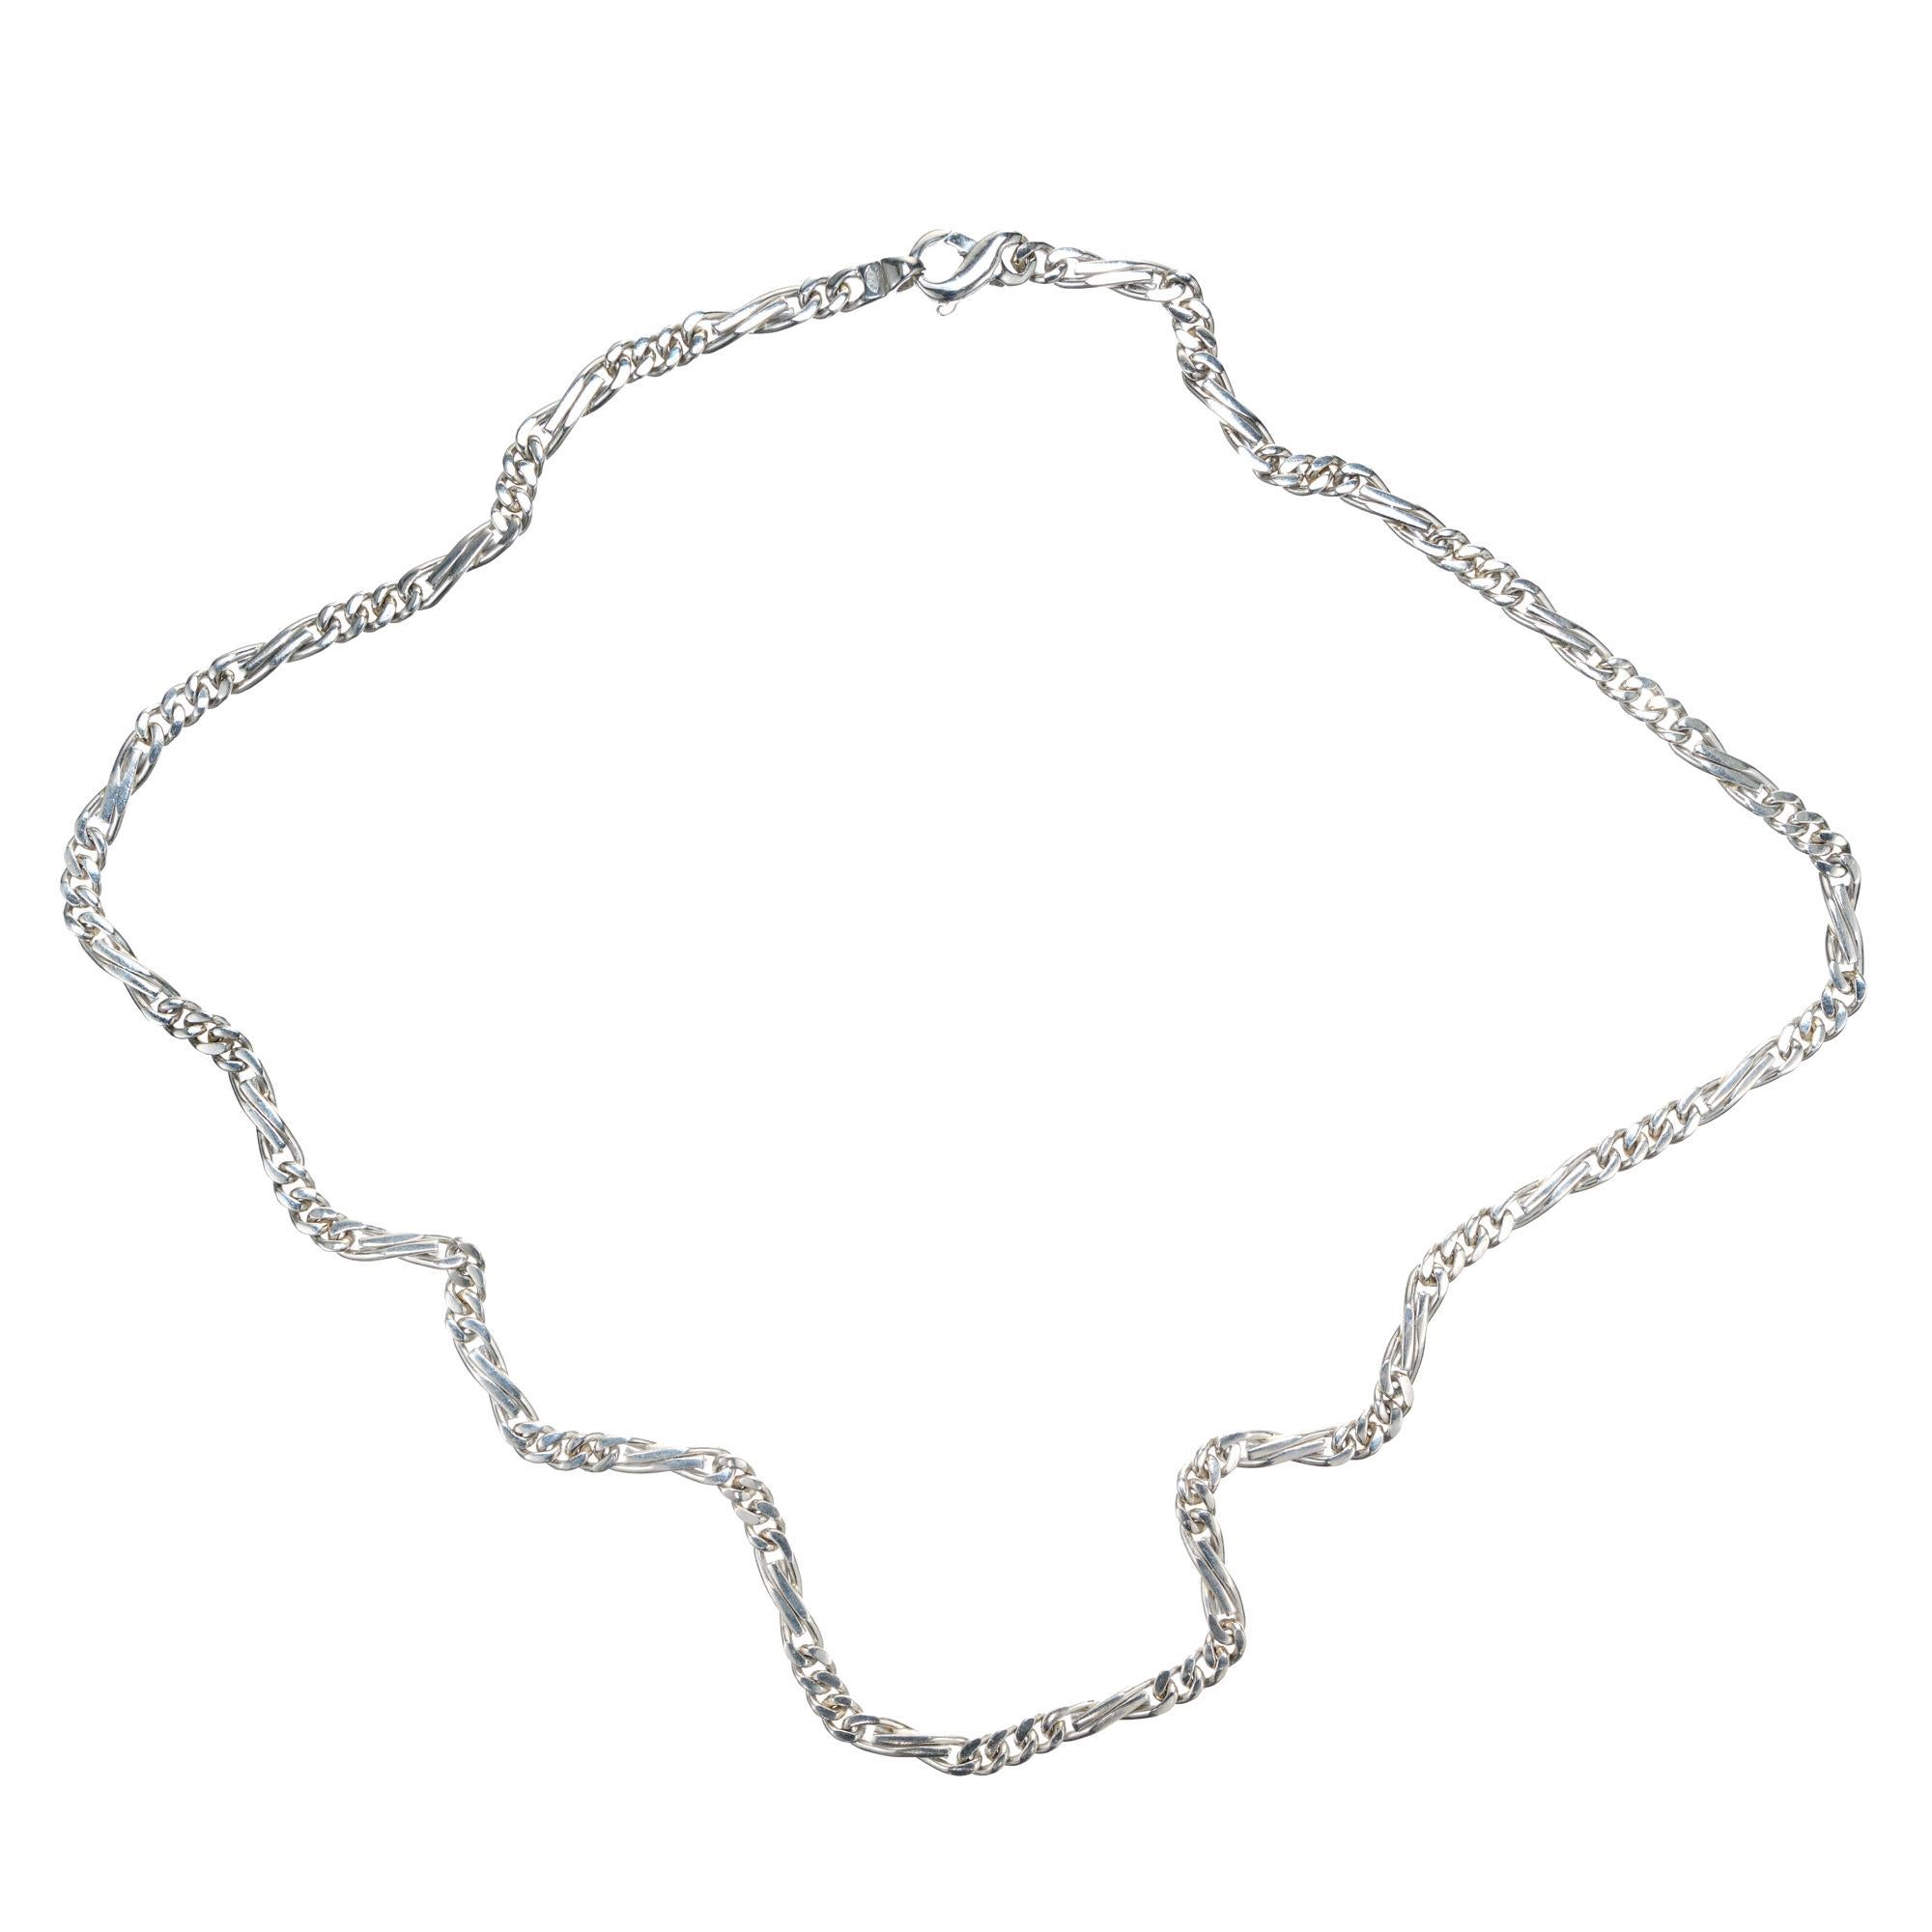 Custom Figaro style solid platinum men's necklace. 20 Inches. This necklace has ample weight, perfect for those who prefer a heavier chain.

Platinum 
Stamped: 950
44.8 grams
Total length: 20 Inches
Width: 4.2mm
Thickness/depth: 1.9mm
